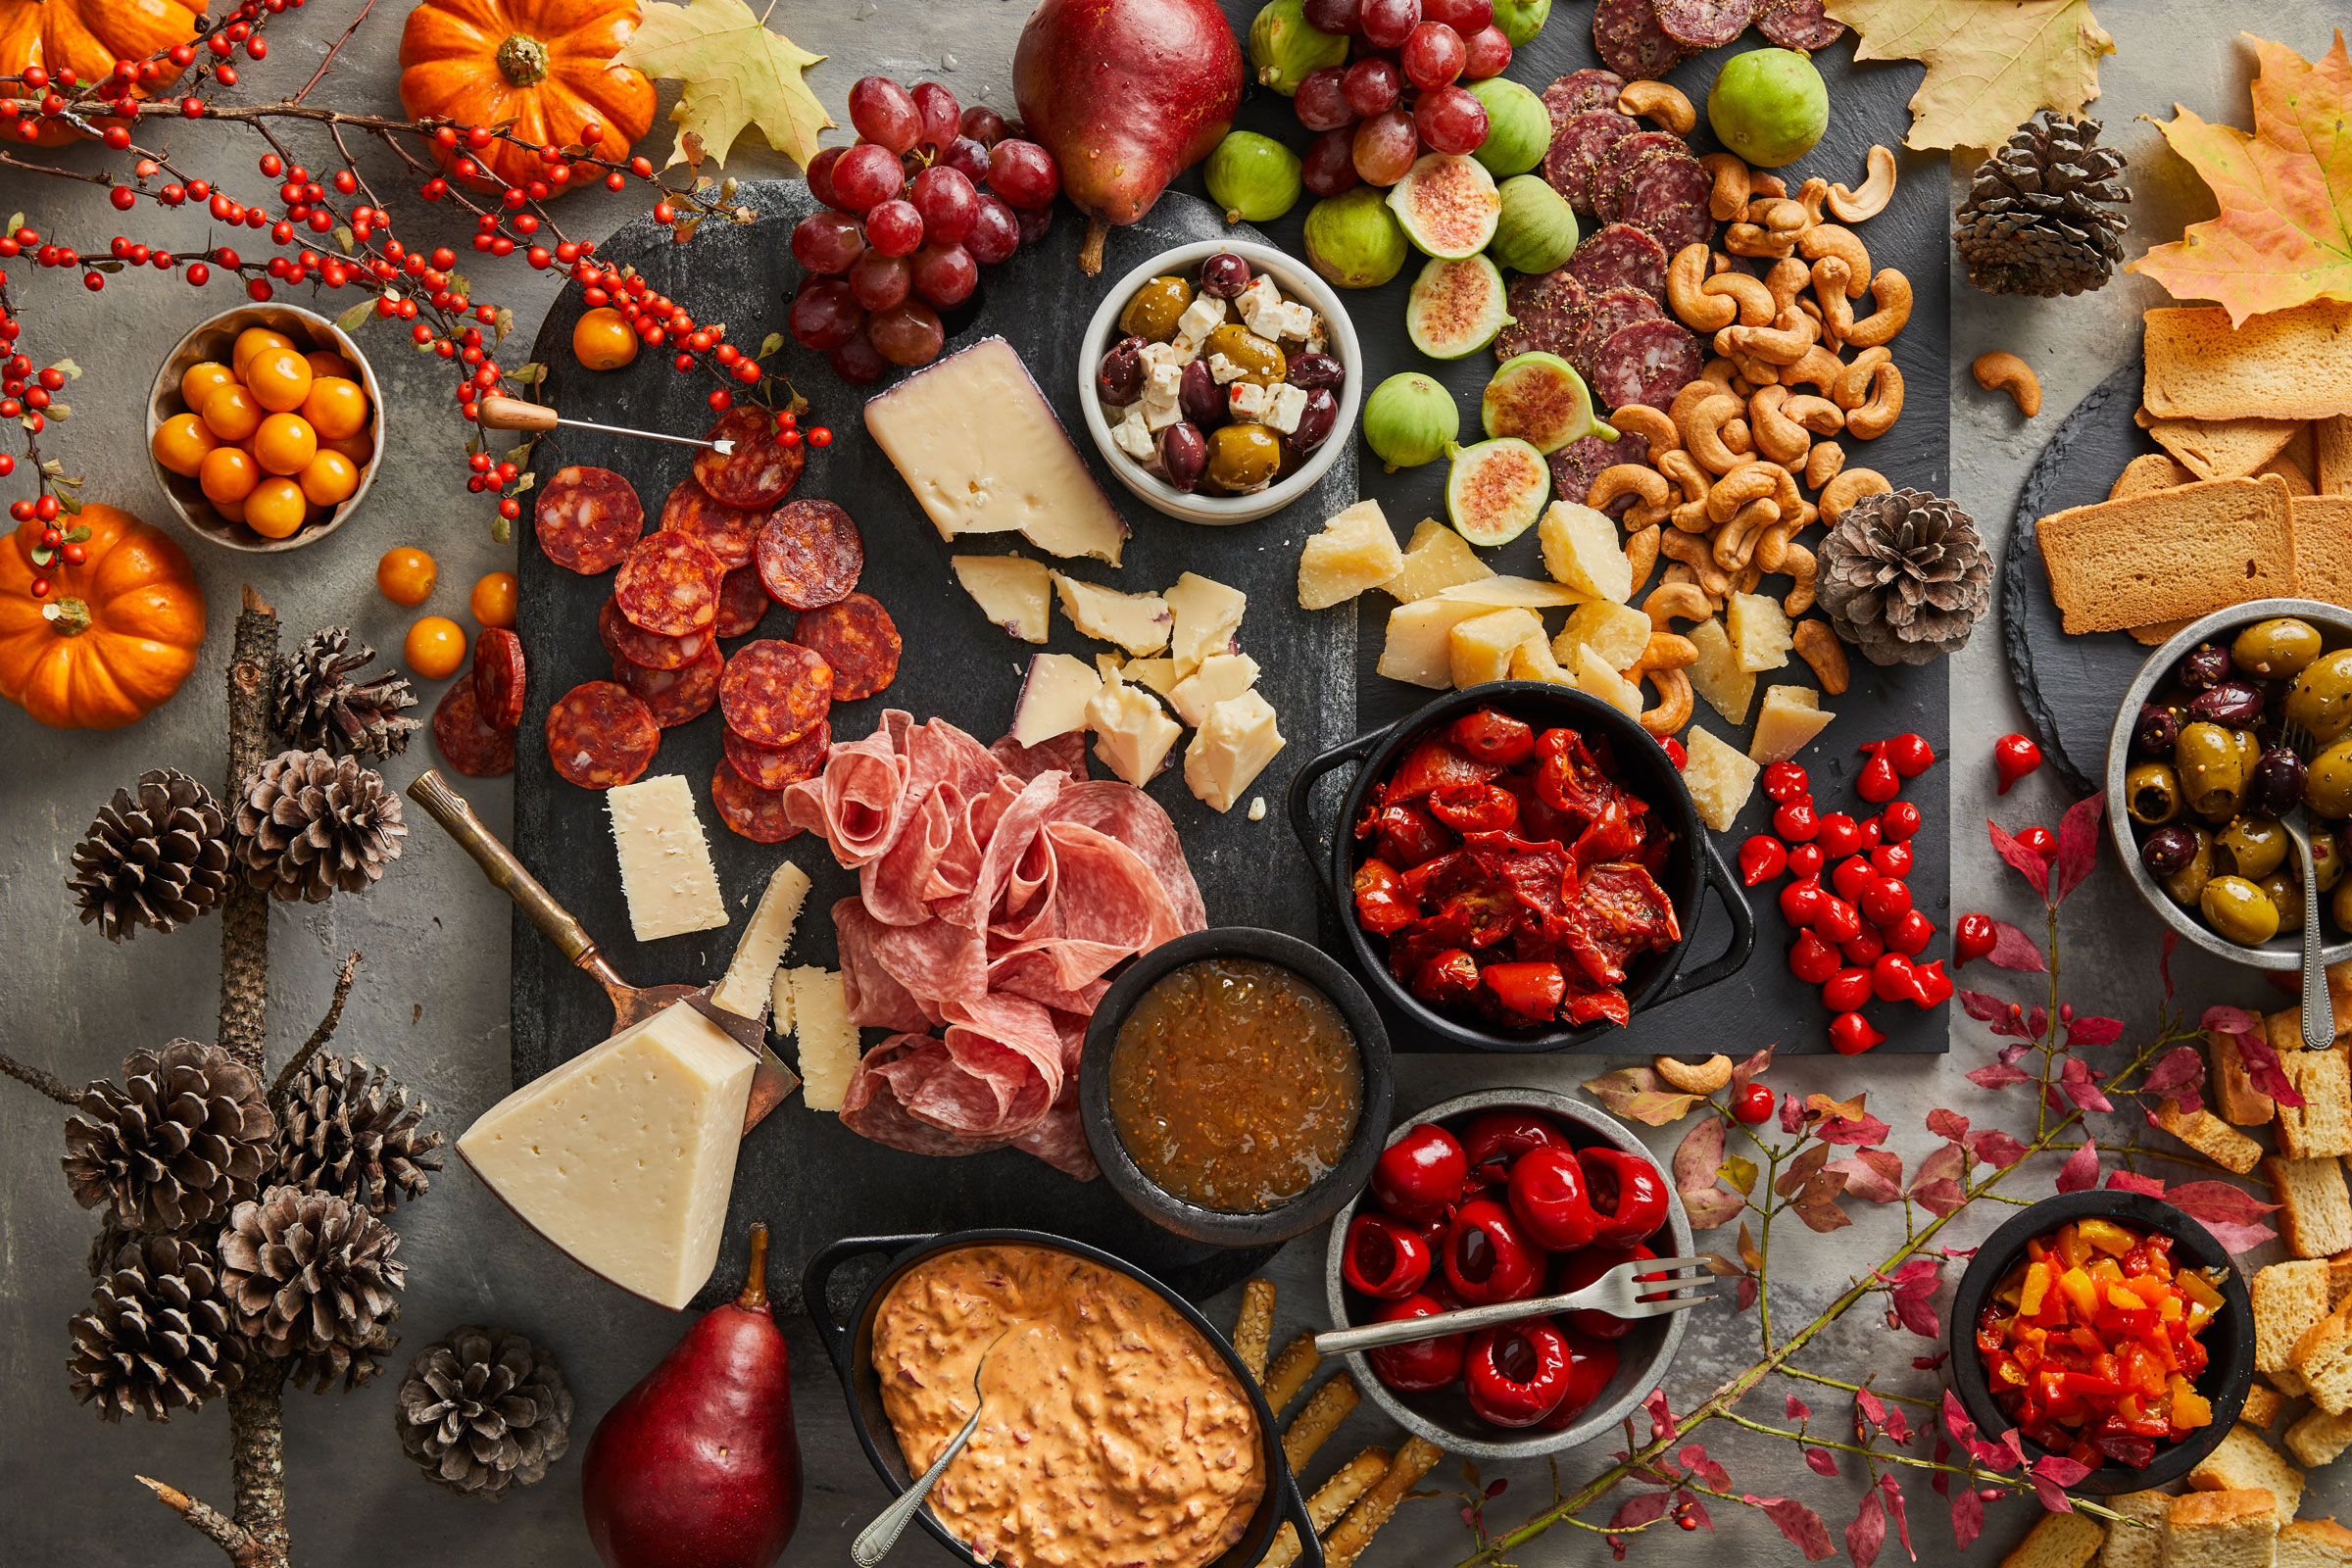 Fall themed charcuterie board with assorted olives, antipasti, meats, cheeses, fruit, nuts and more